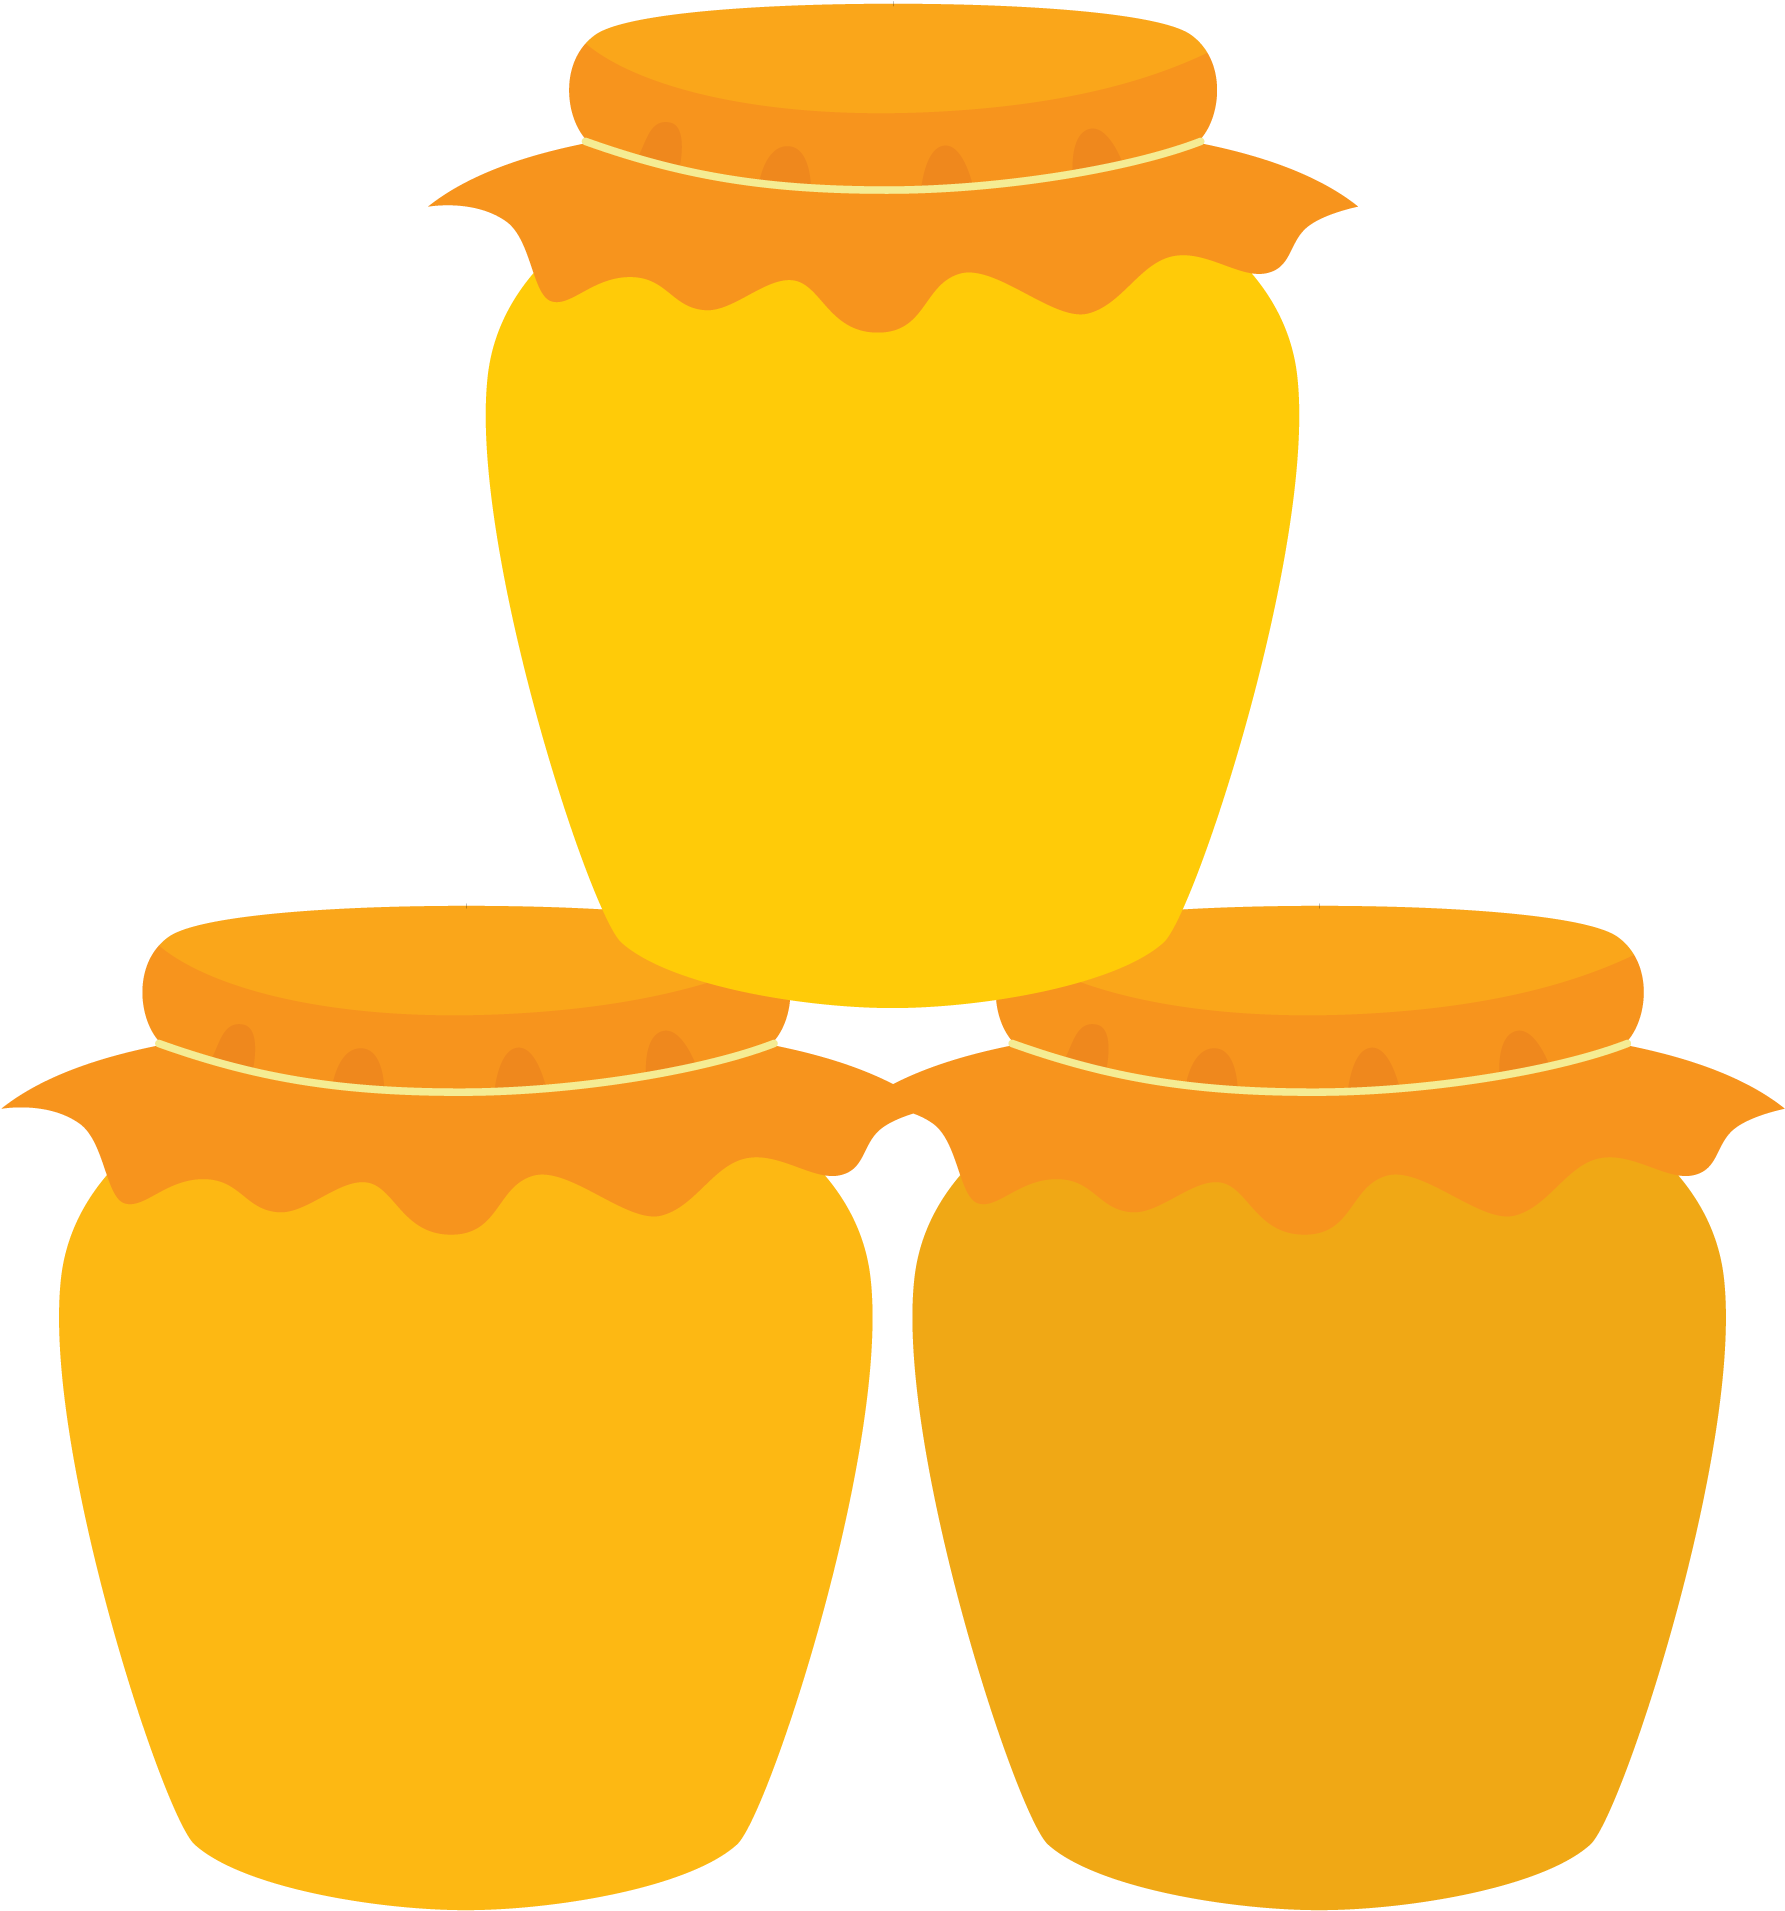 Curious About Our Services - Cartoon Honey Pots Clipart, free png download.